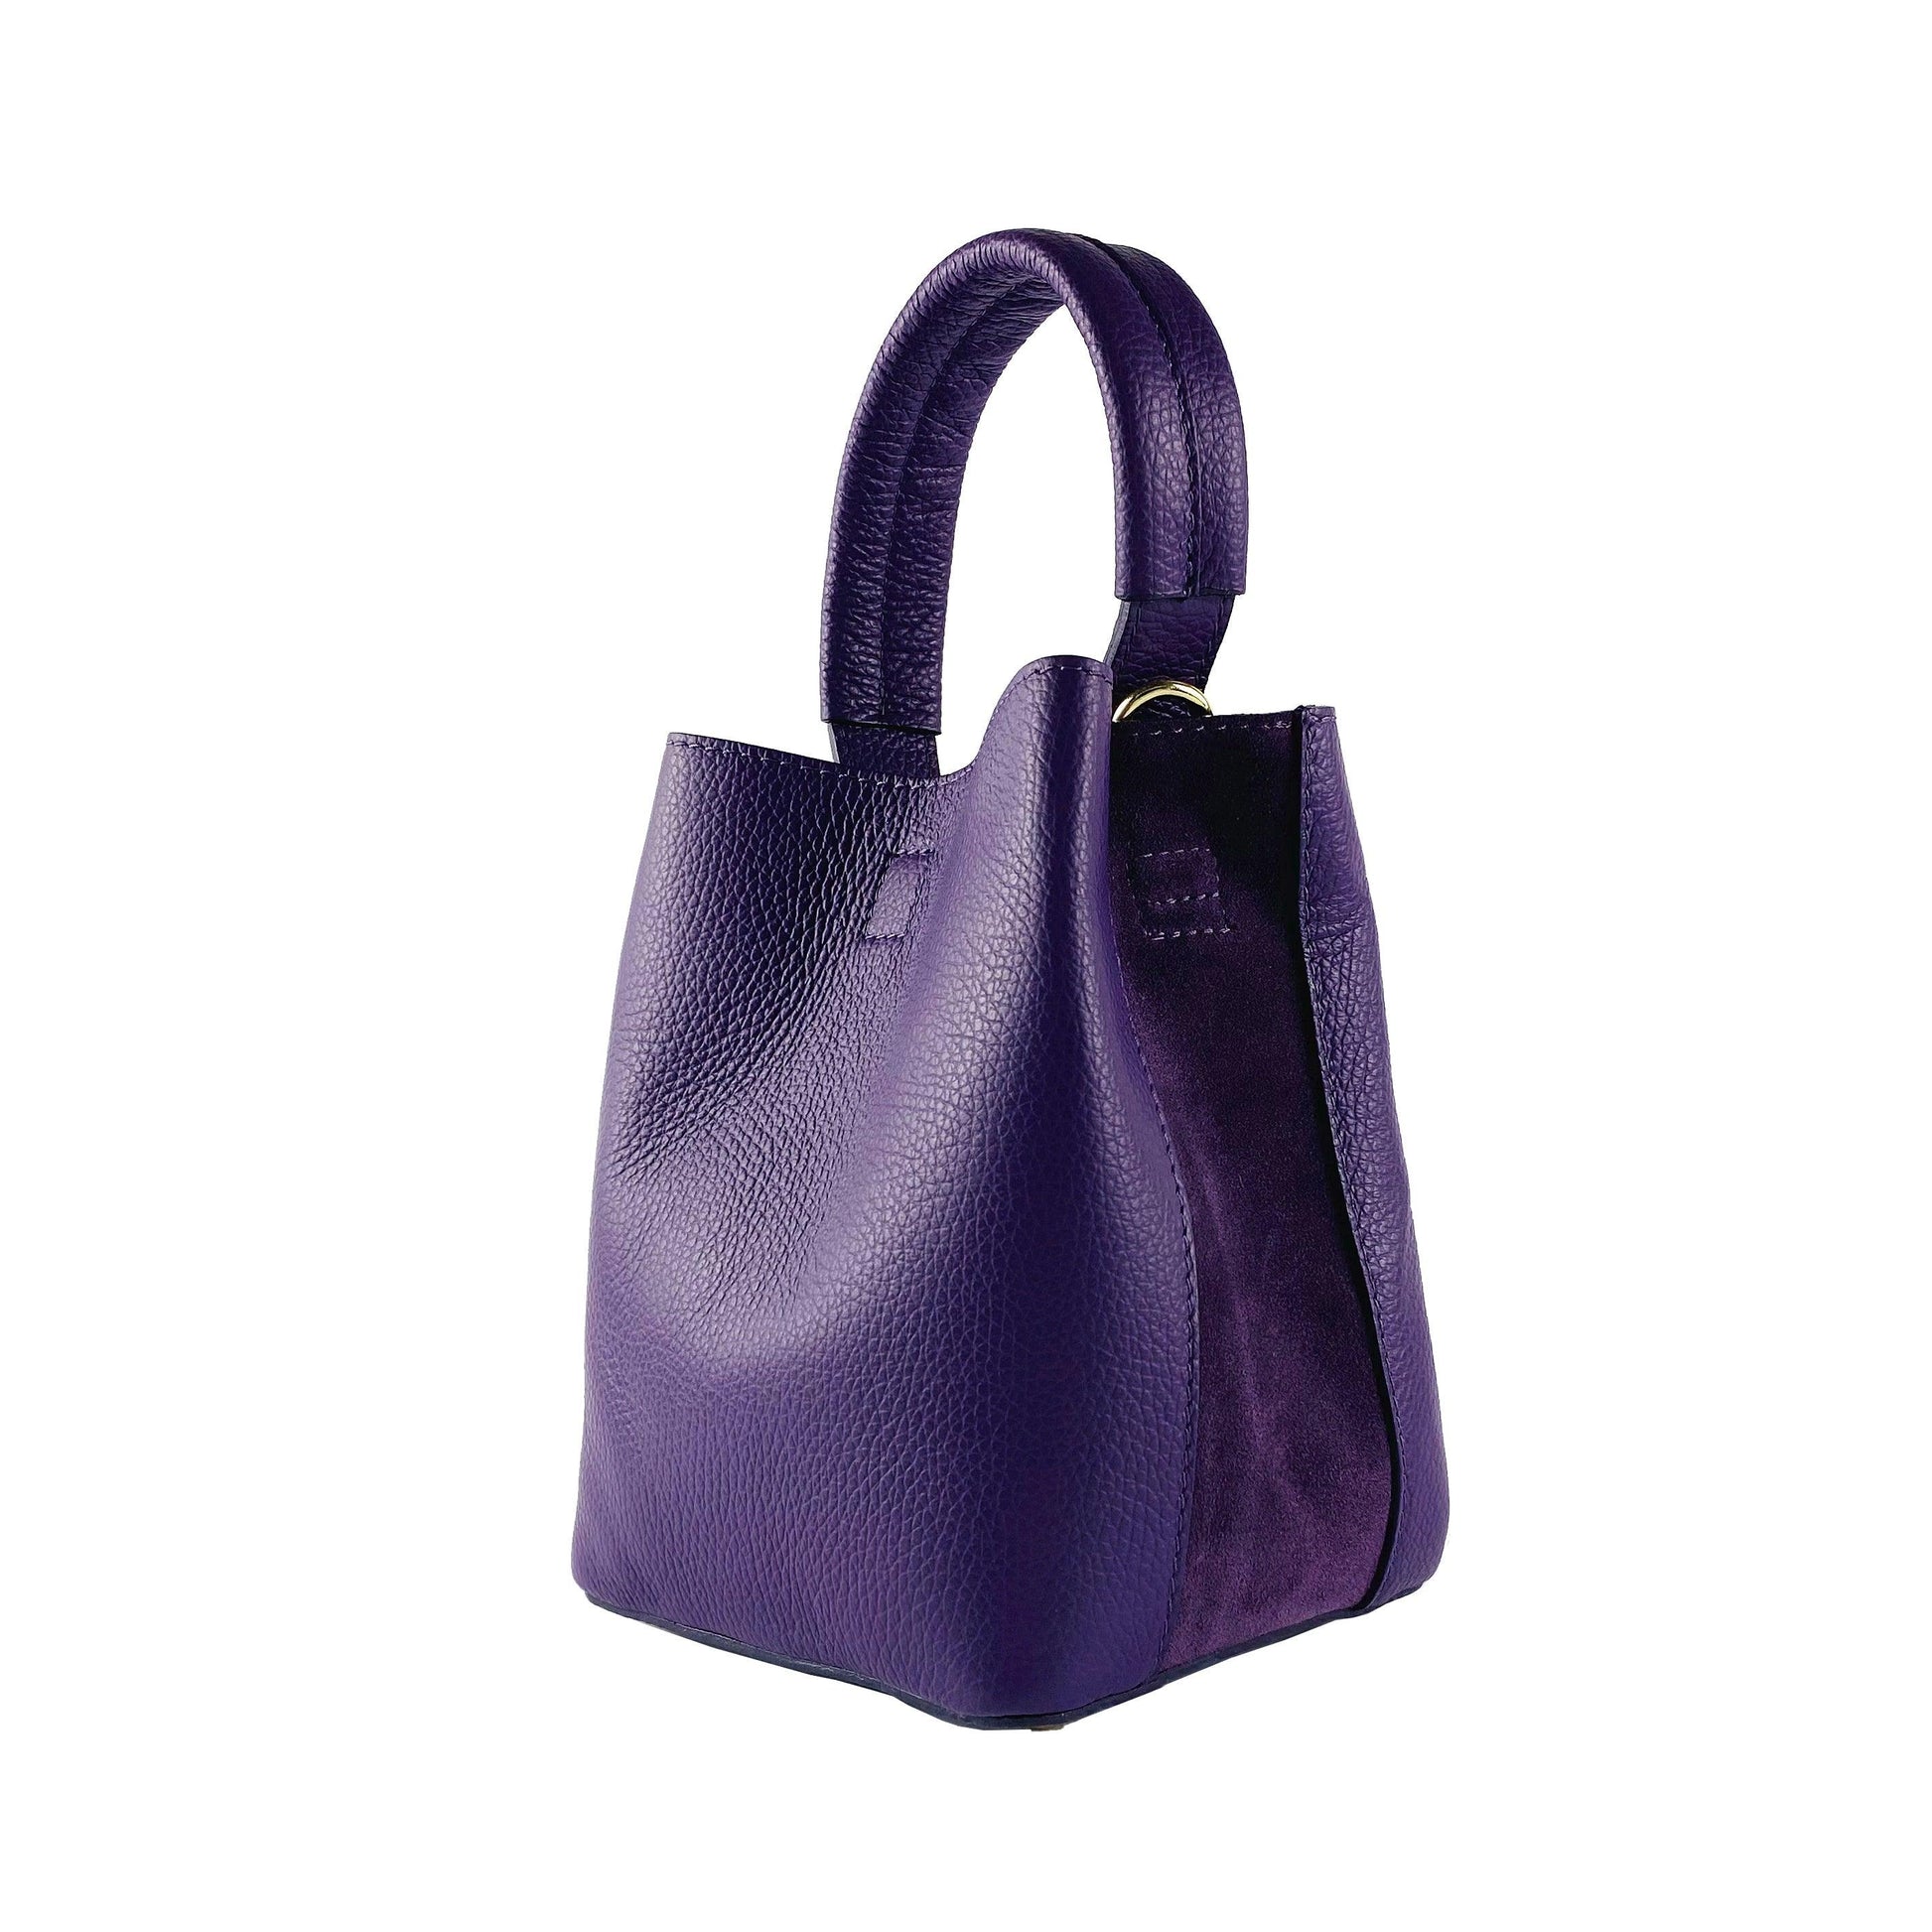 RB1006Y | Women's Bucket Bag with Shoulder Bag in Genuine Leather | 16 x 14 x 21 cm-1